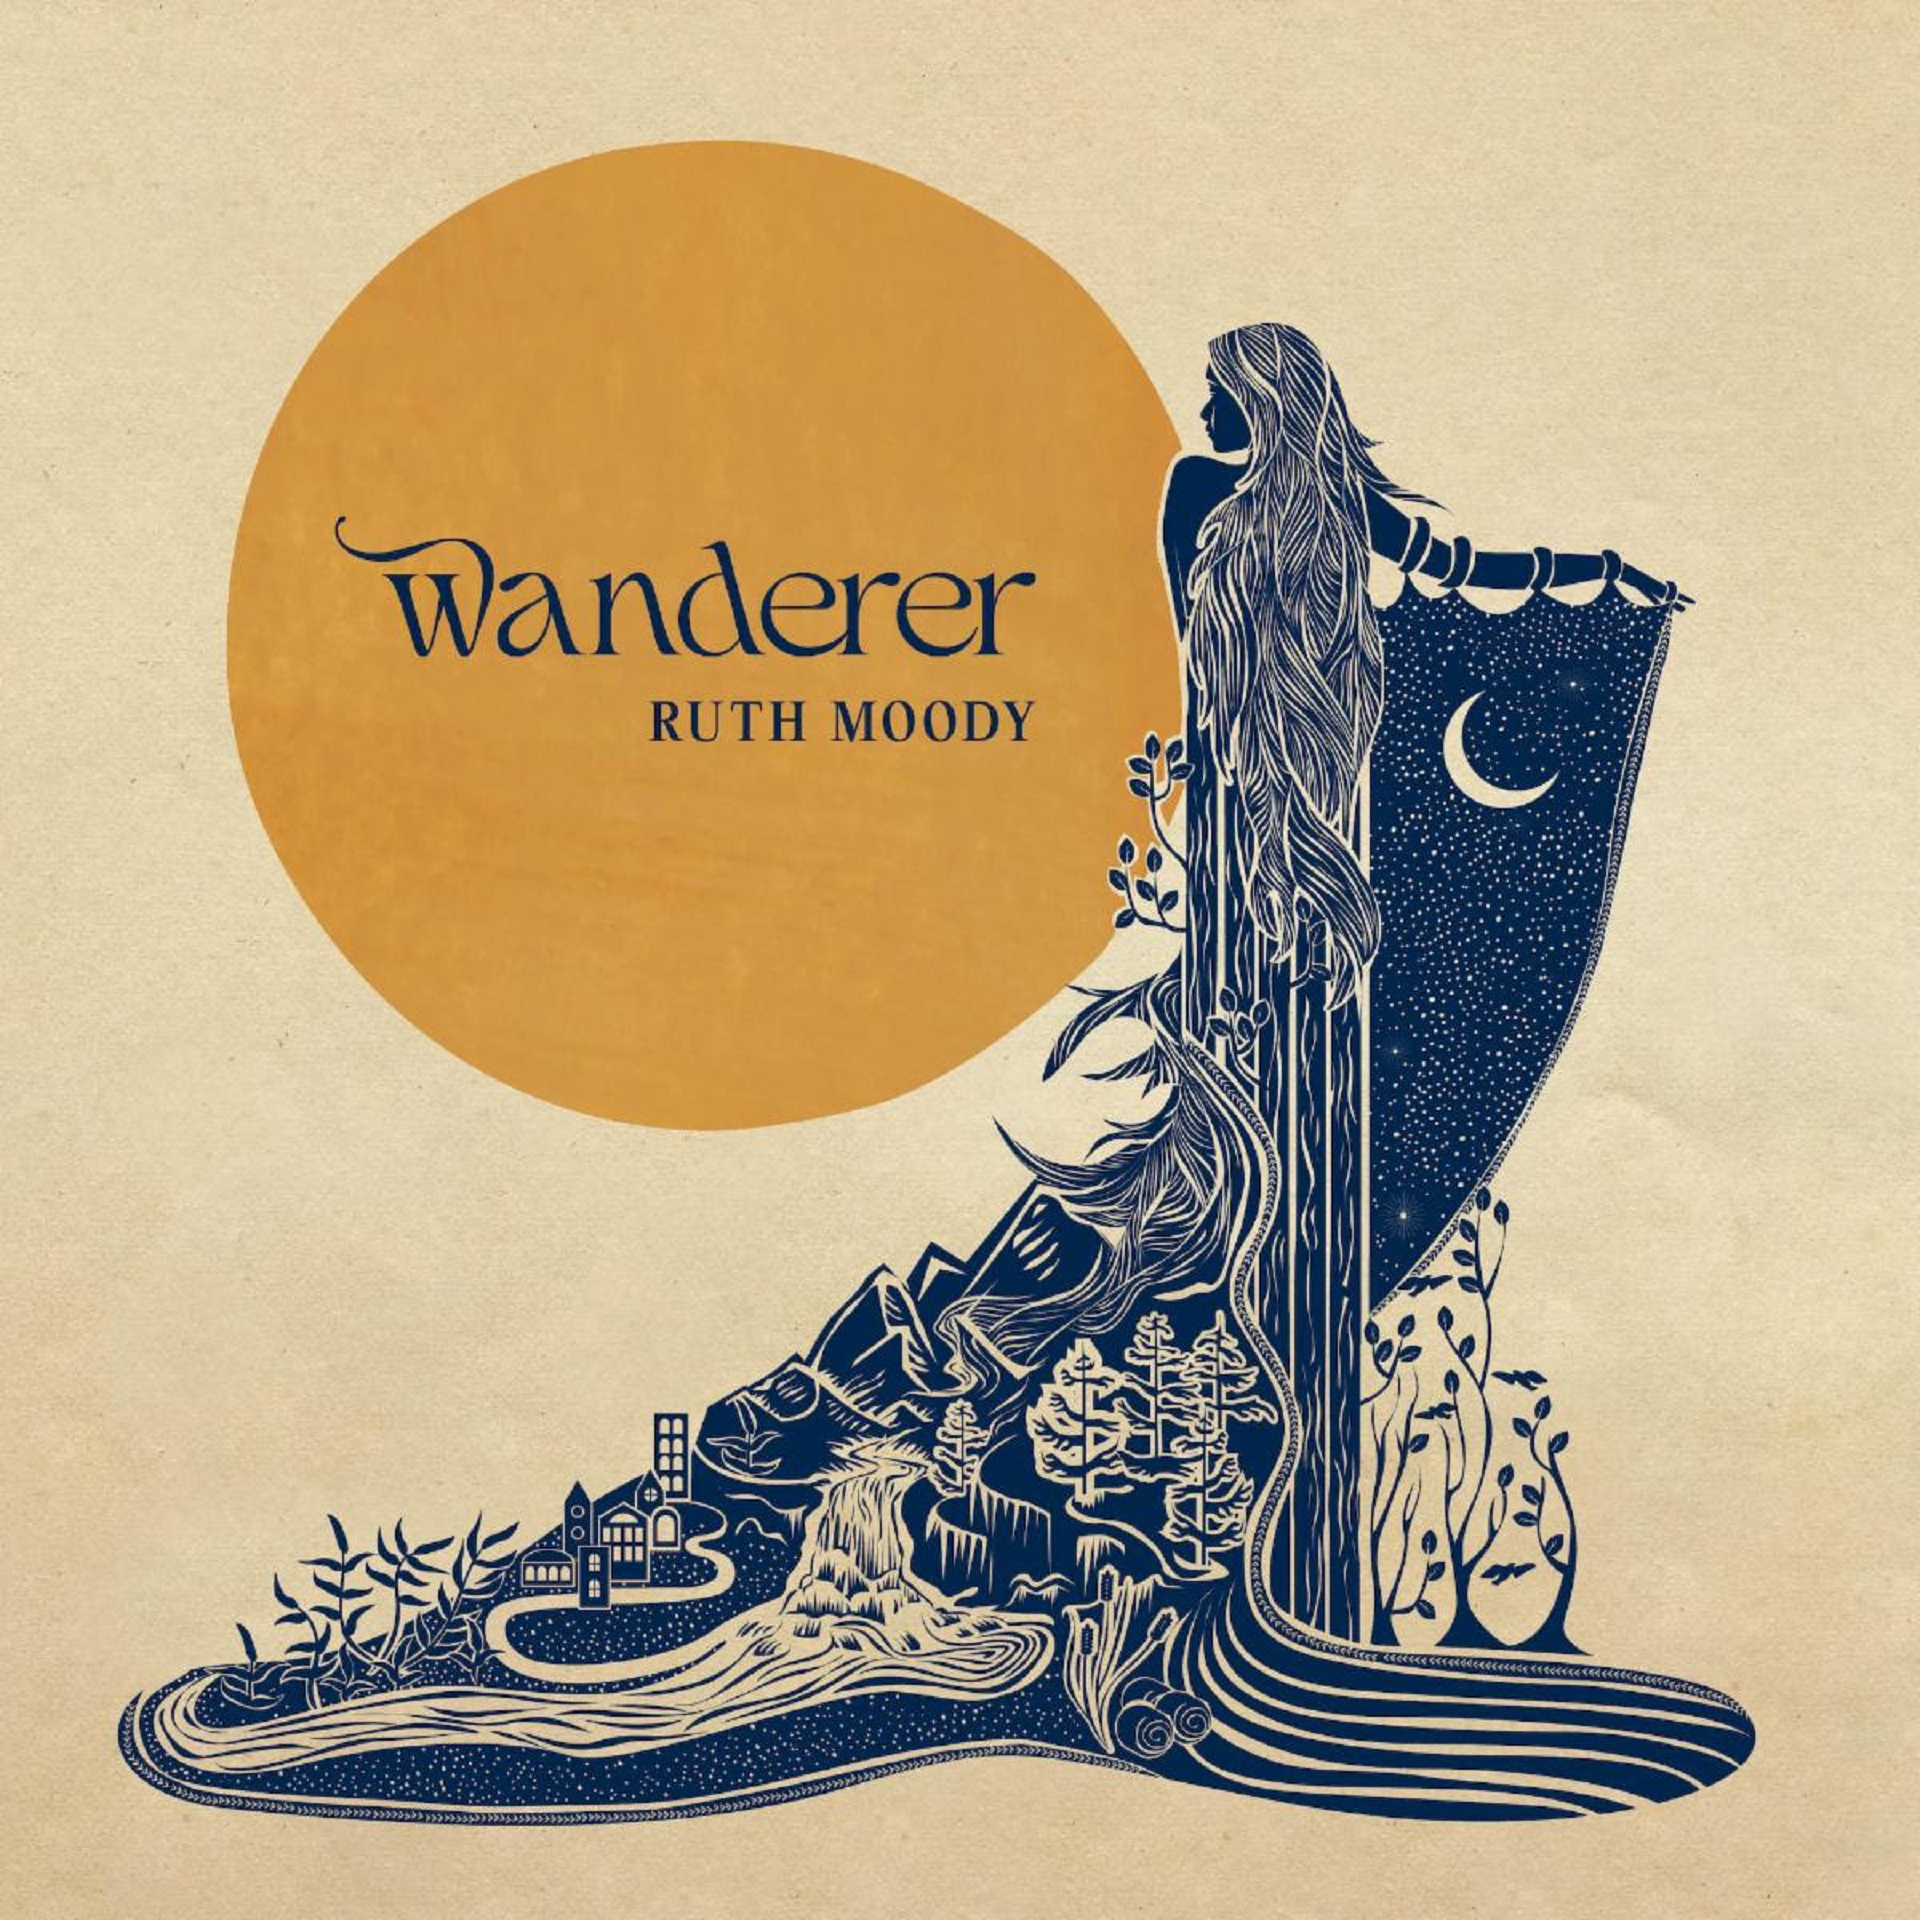 RUTH MOODY (The Wailin' Jennys) premieres first single from 'Wanderer,' out May 17